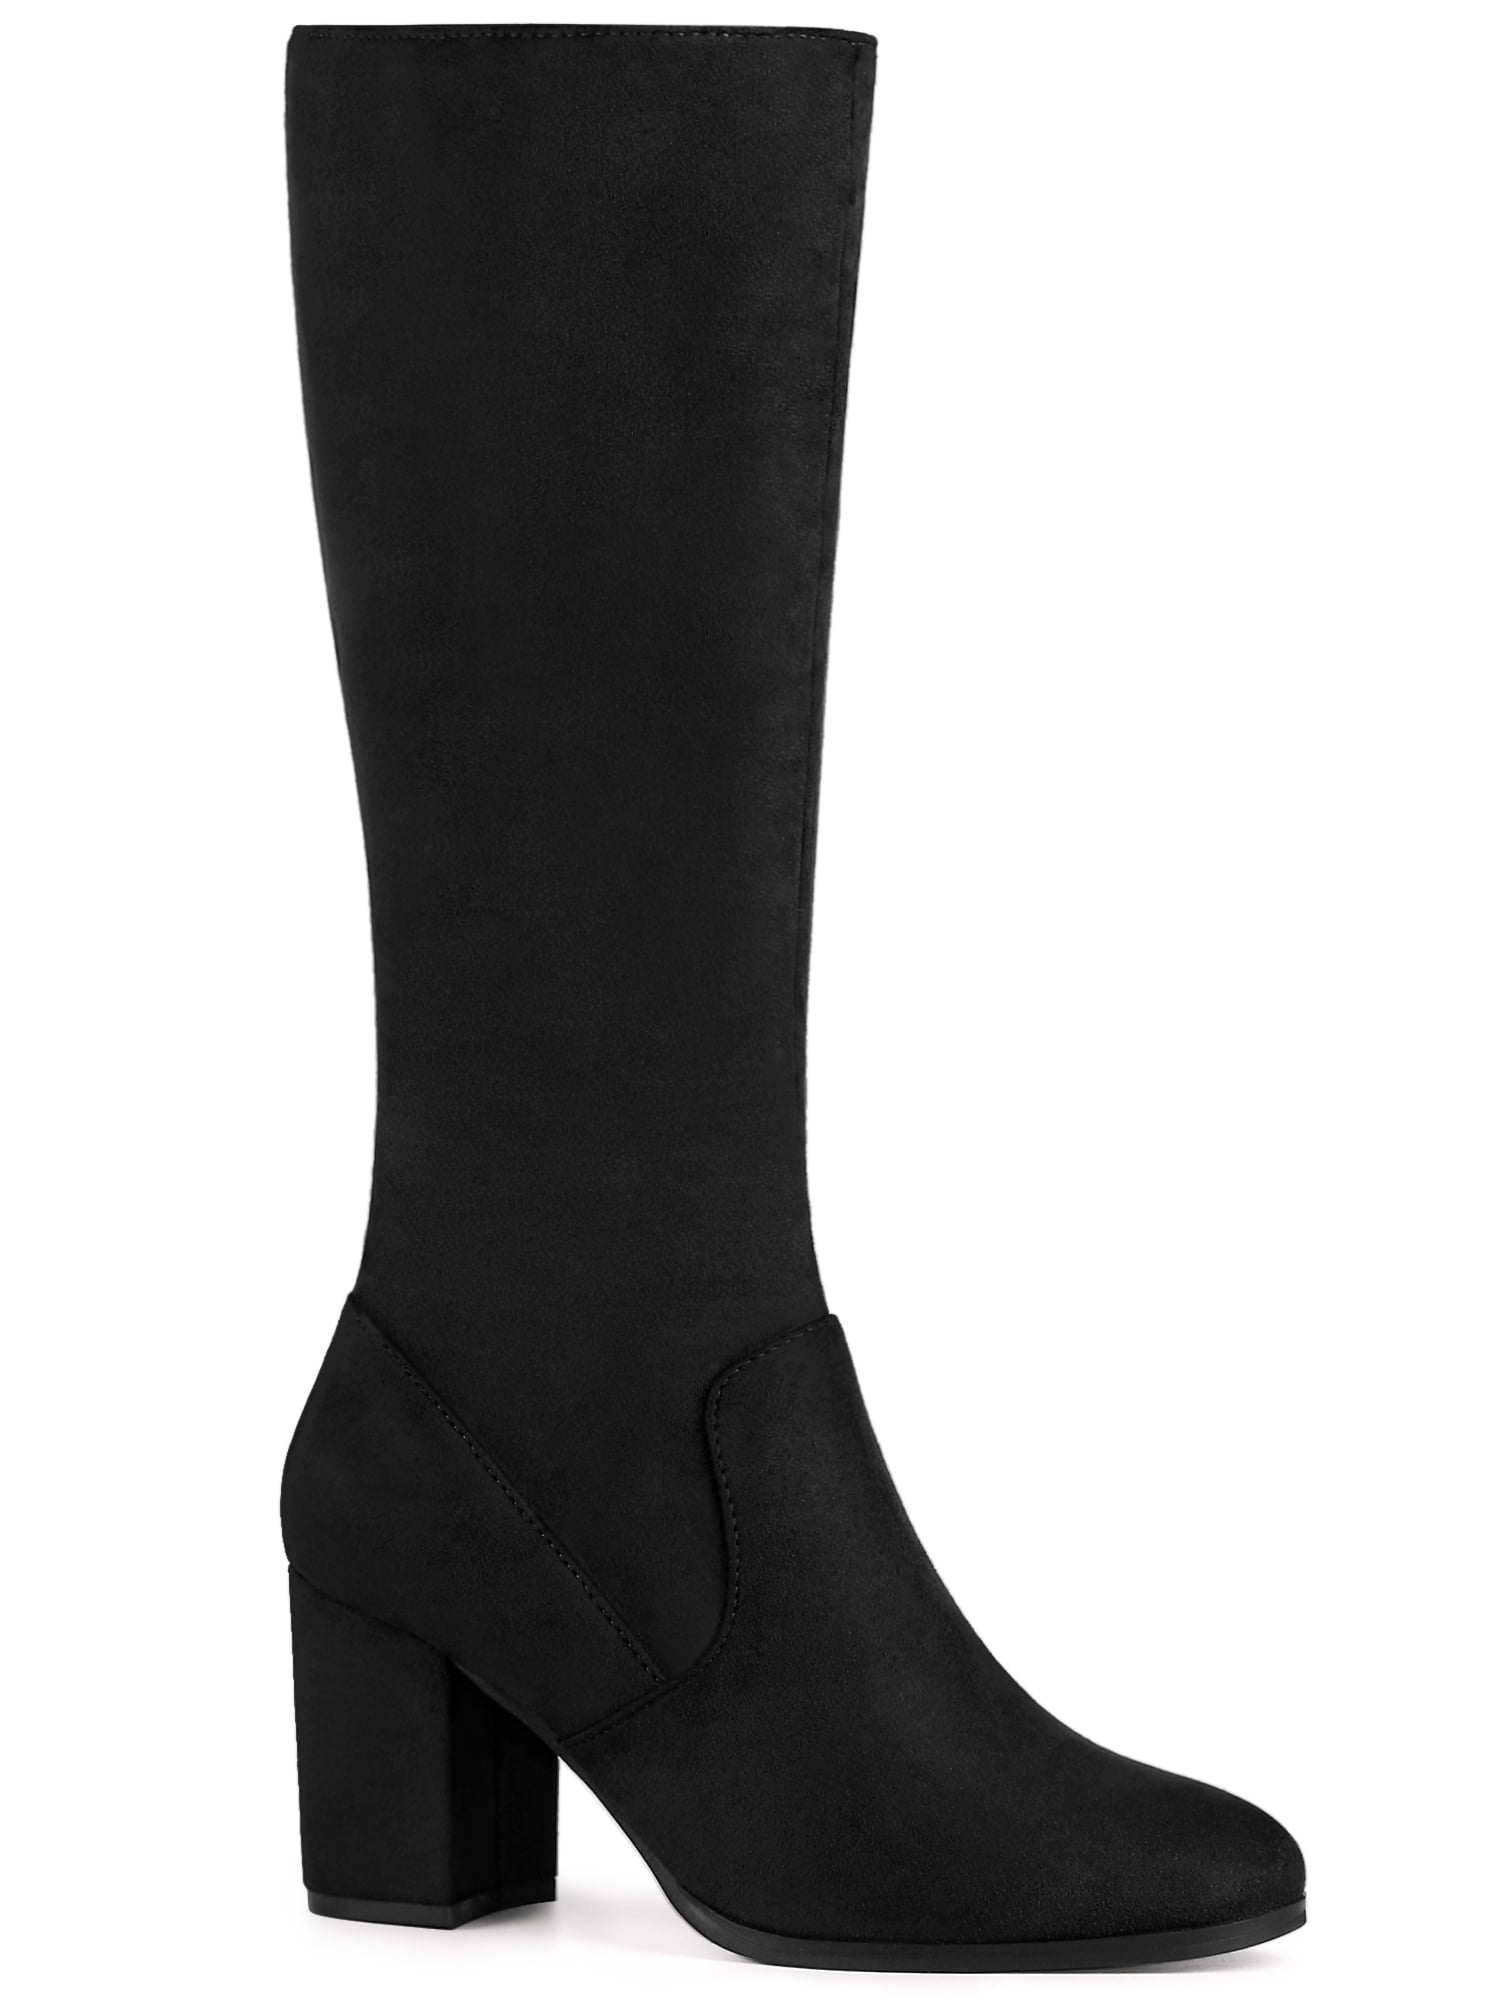 Perphy Womens Round Toe Chunky High Heels Knee High Boots 